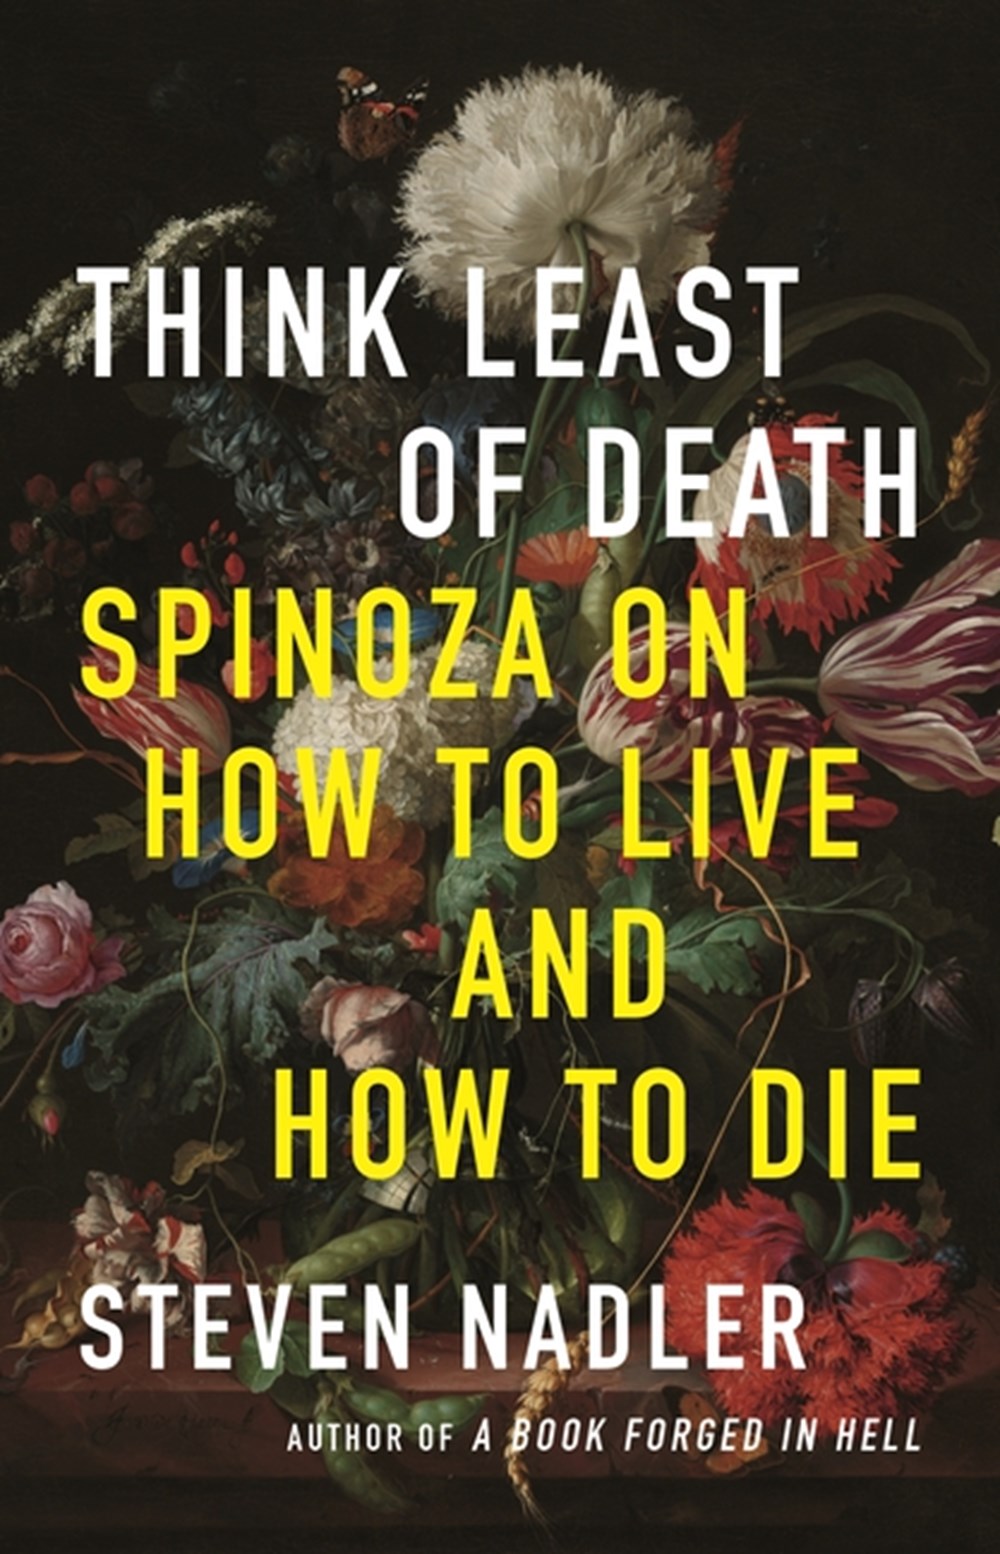 Think Least of Death Spinoza on How to Live and How to Die